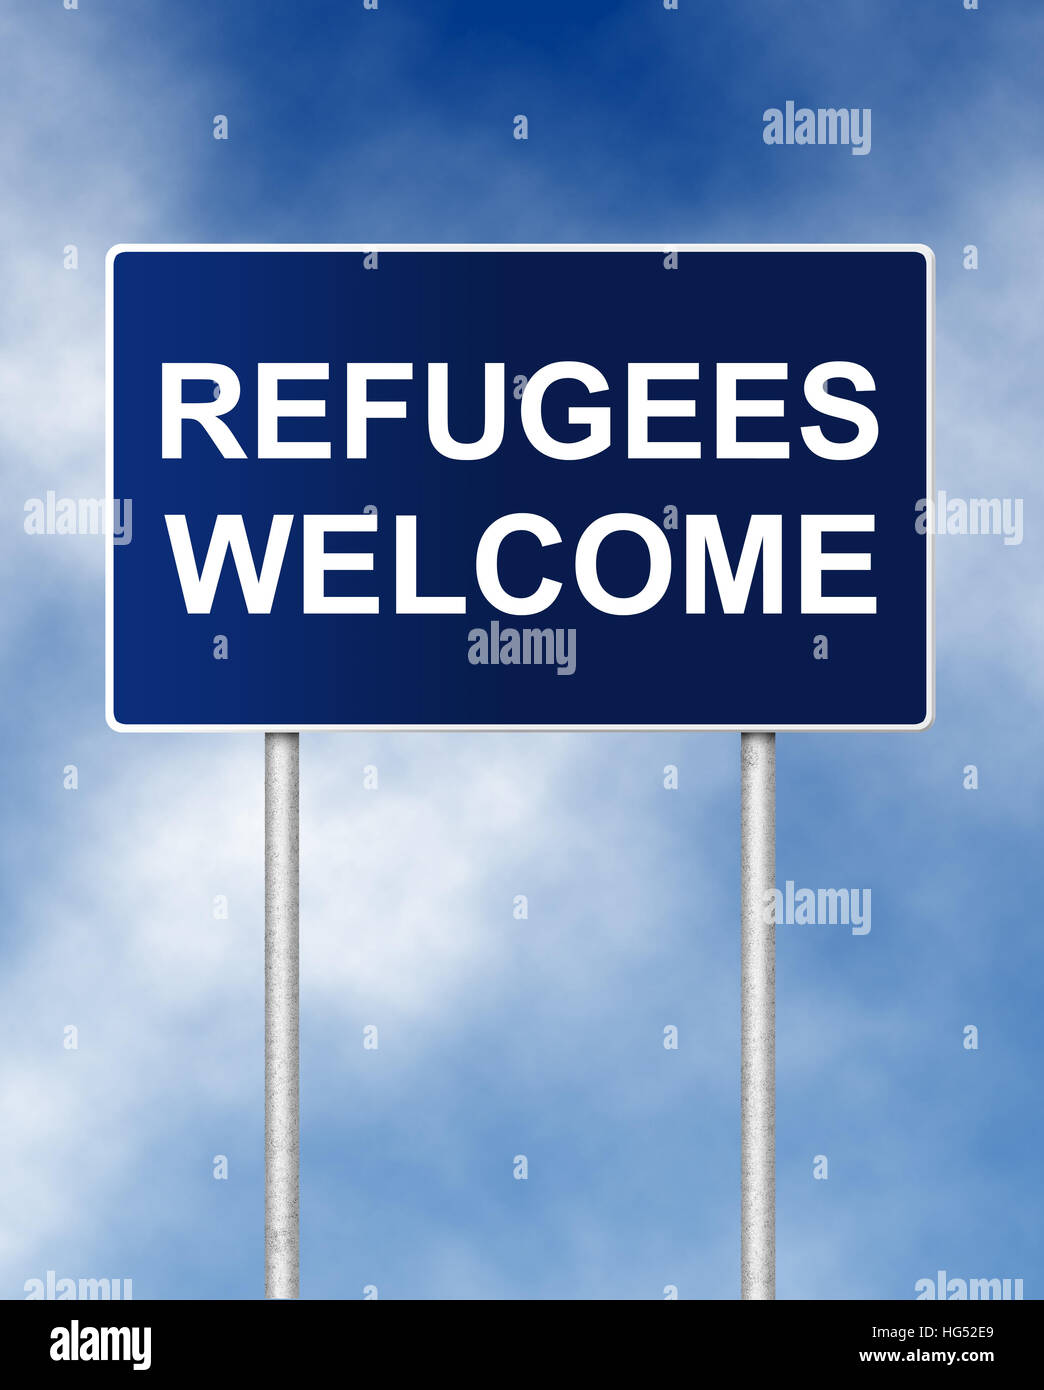 The road sign symbol with text Refugees welcome Stock Photo